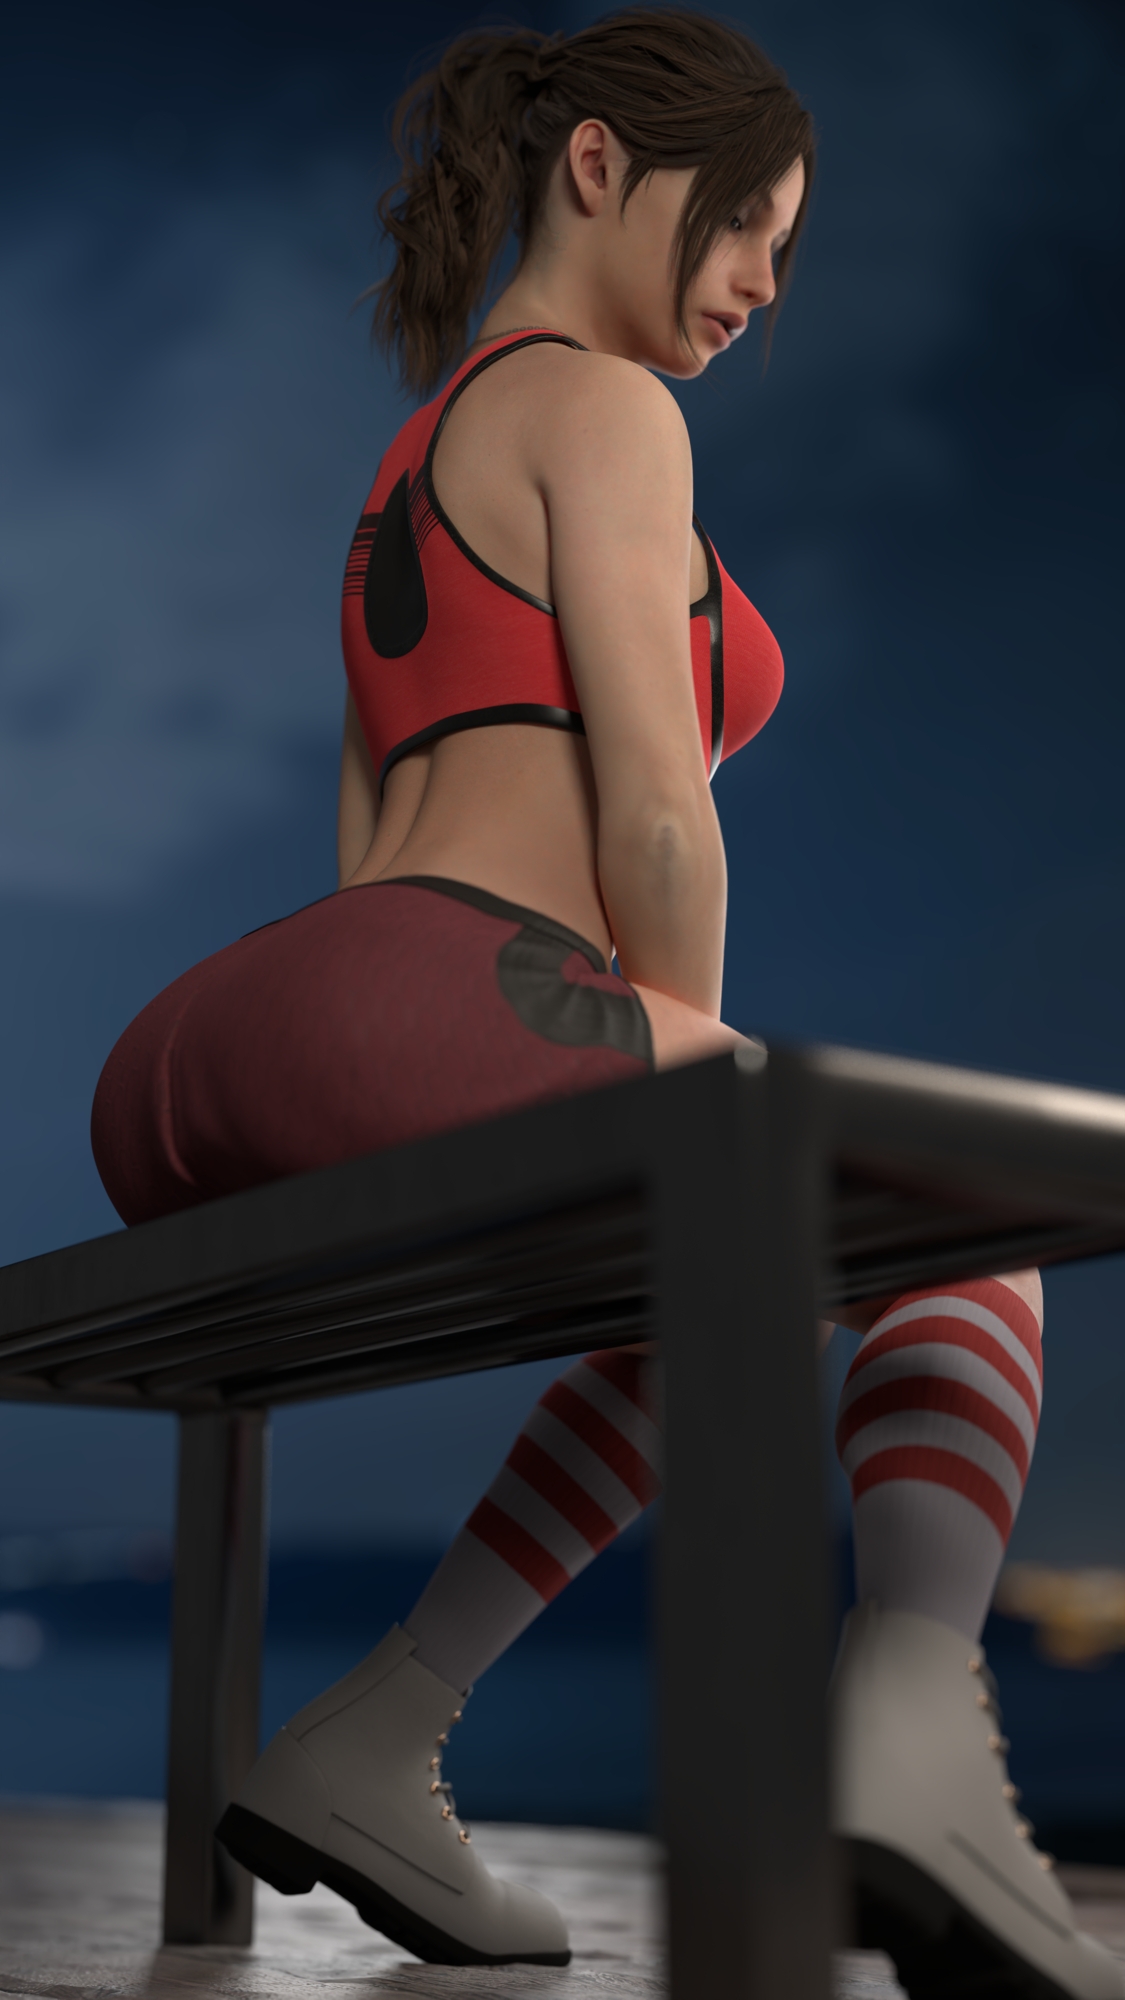 Claire just resting on the bench and take some hot pic Claire Redfield Resident Evil Resident Evil 2 